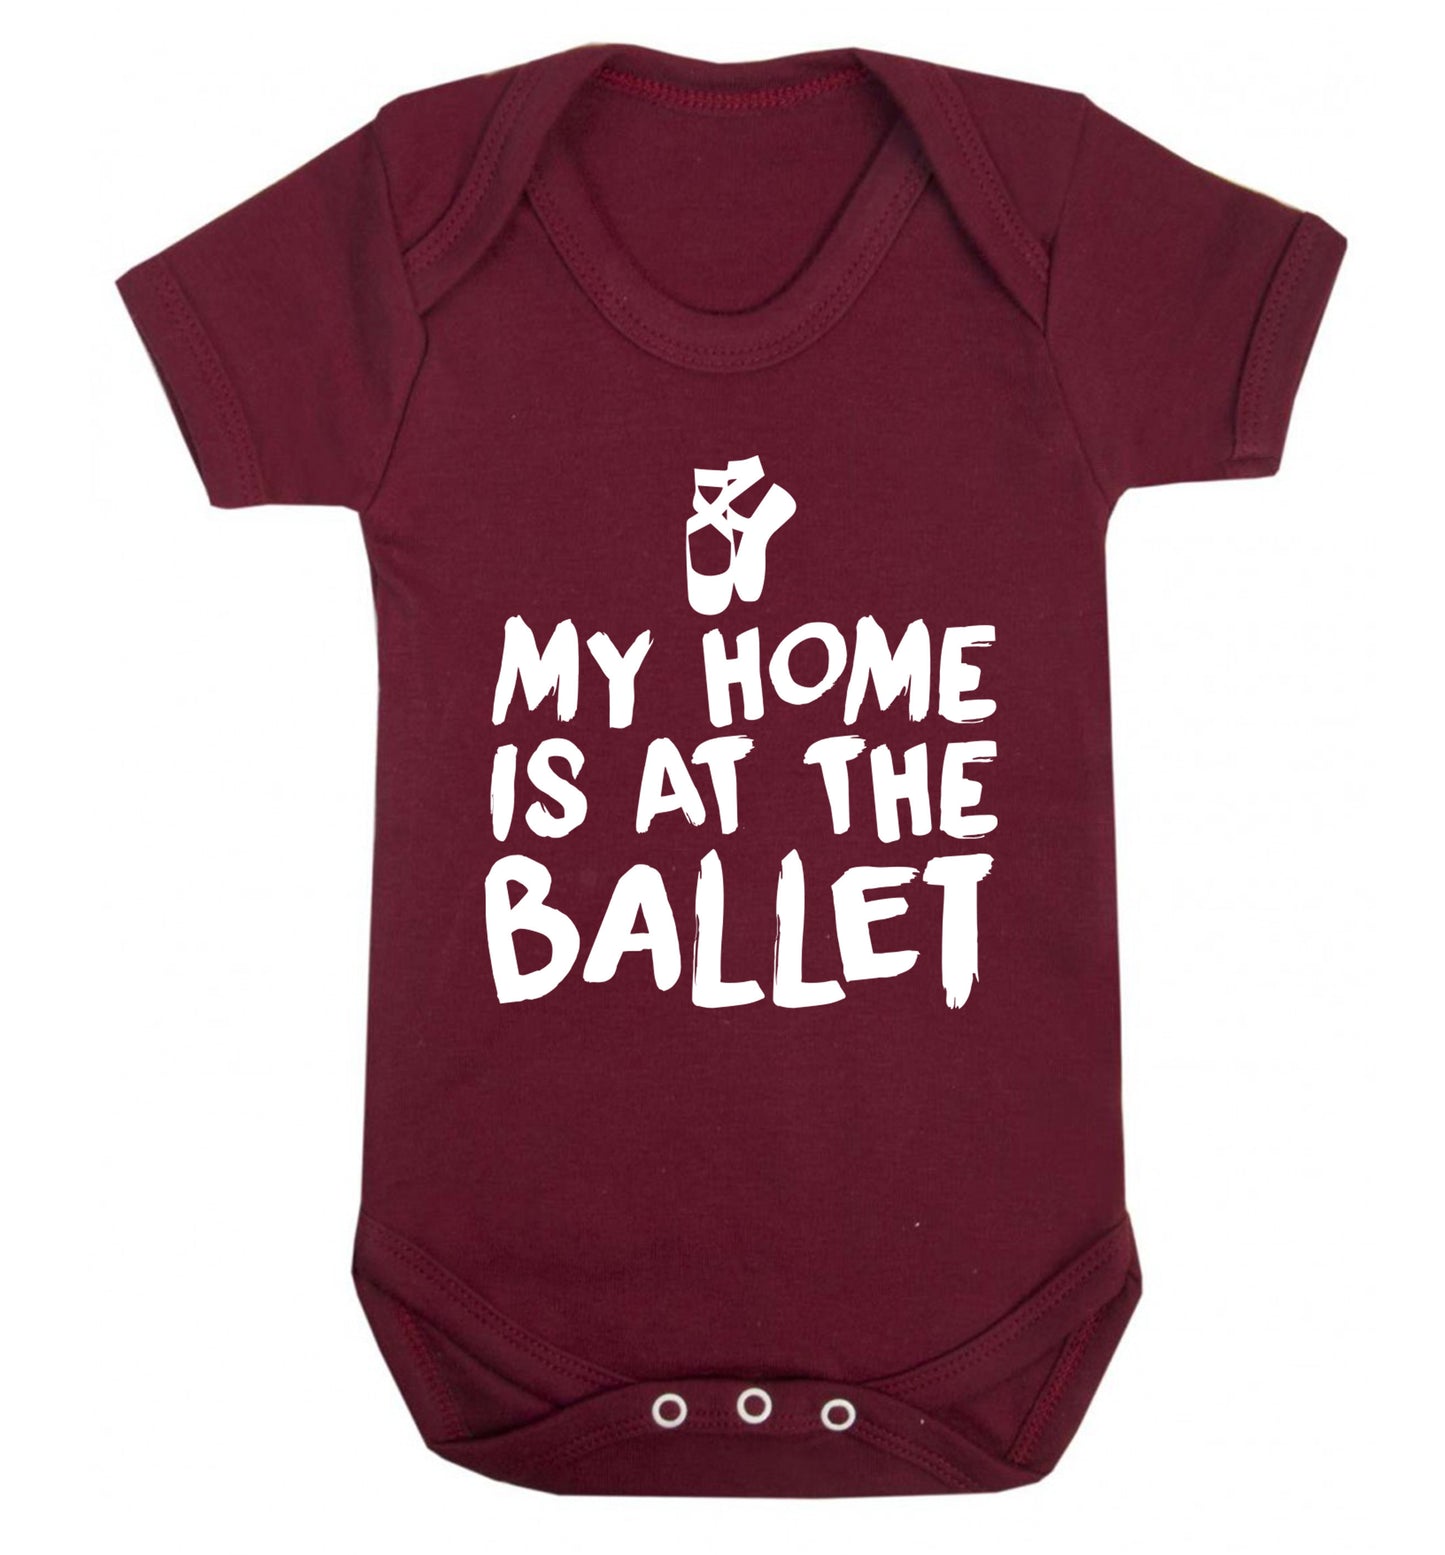 My home is at the dance studio Baby Vest maroon 18-24 months